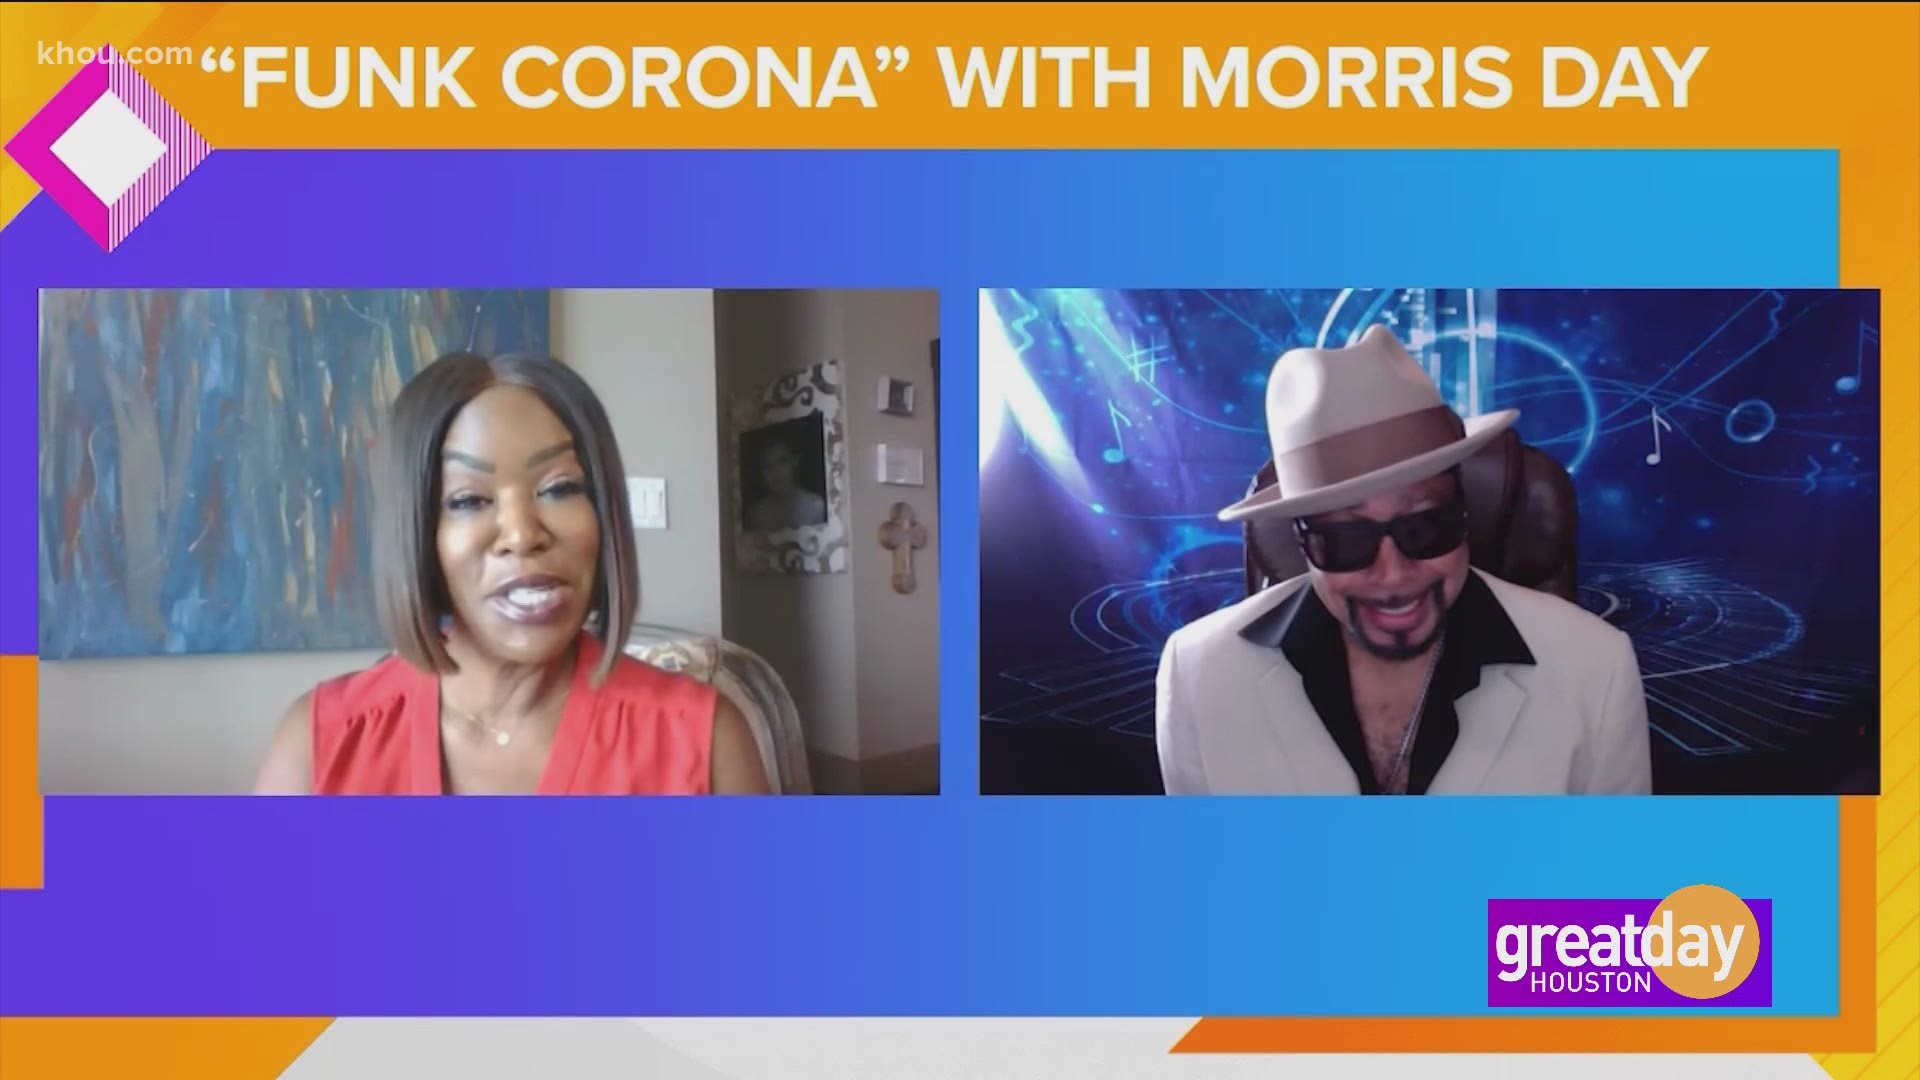 Morris Day from Morris Day and The Time shares on his music career involving the late Prince and his upcoming benefit concert for frontline care workers.